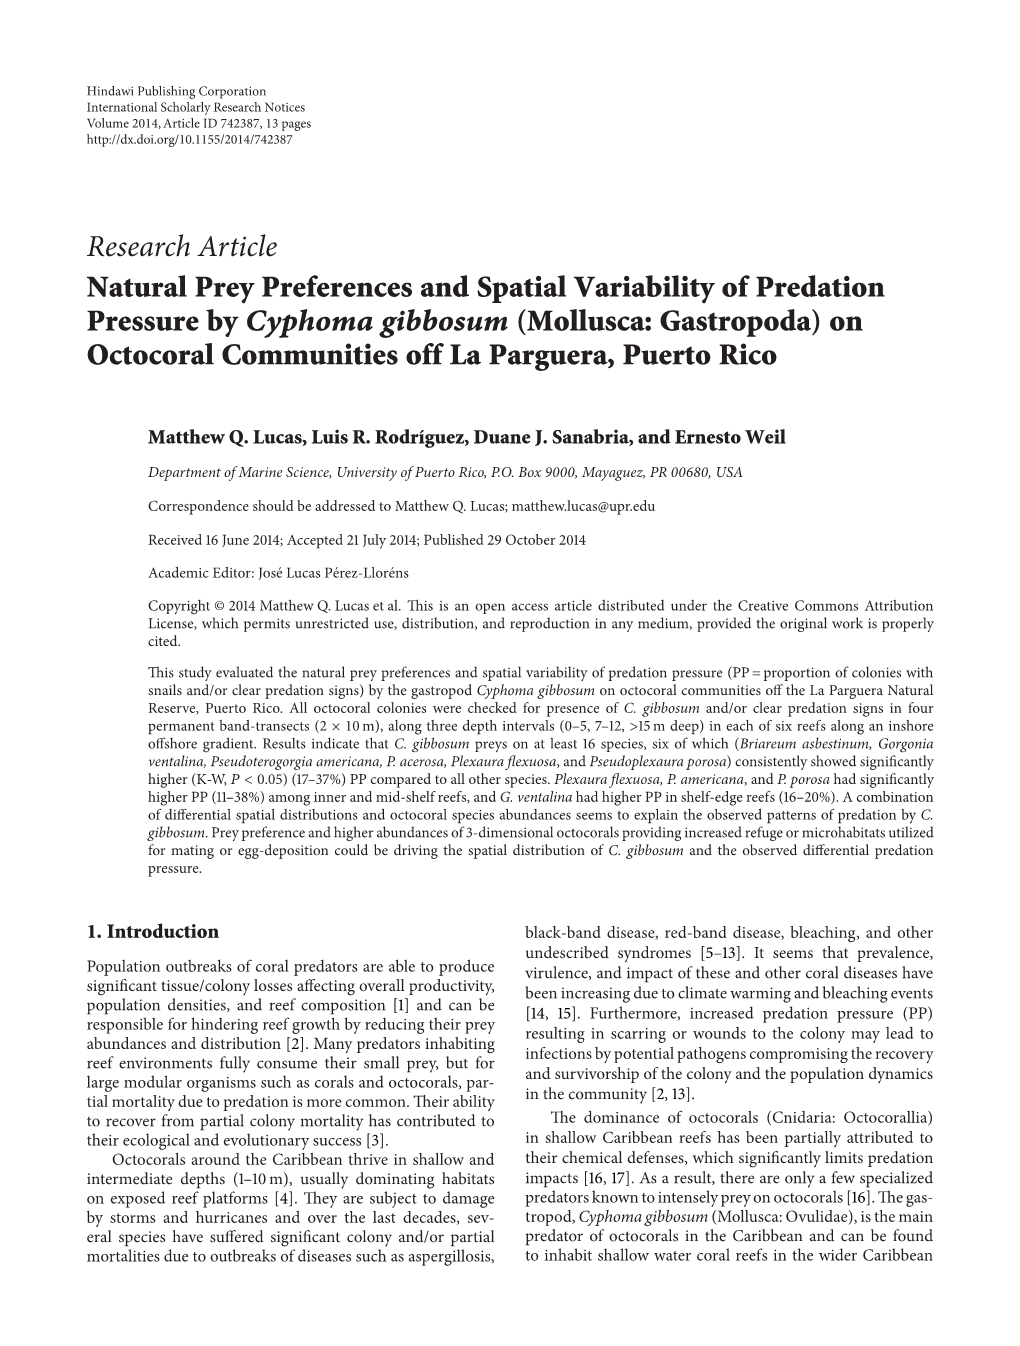 Natural Prey Preferences and Spatial Variability of Predation Pressure By